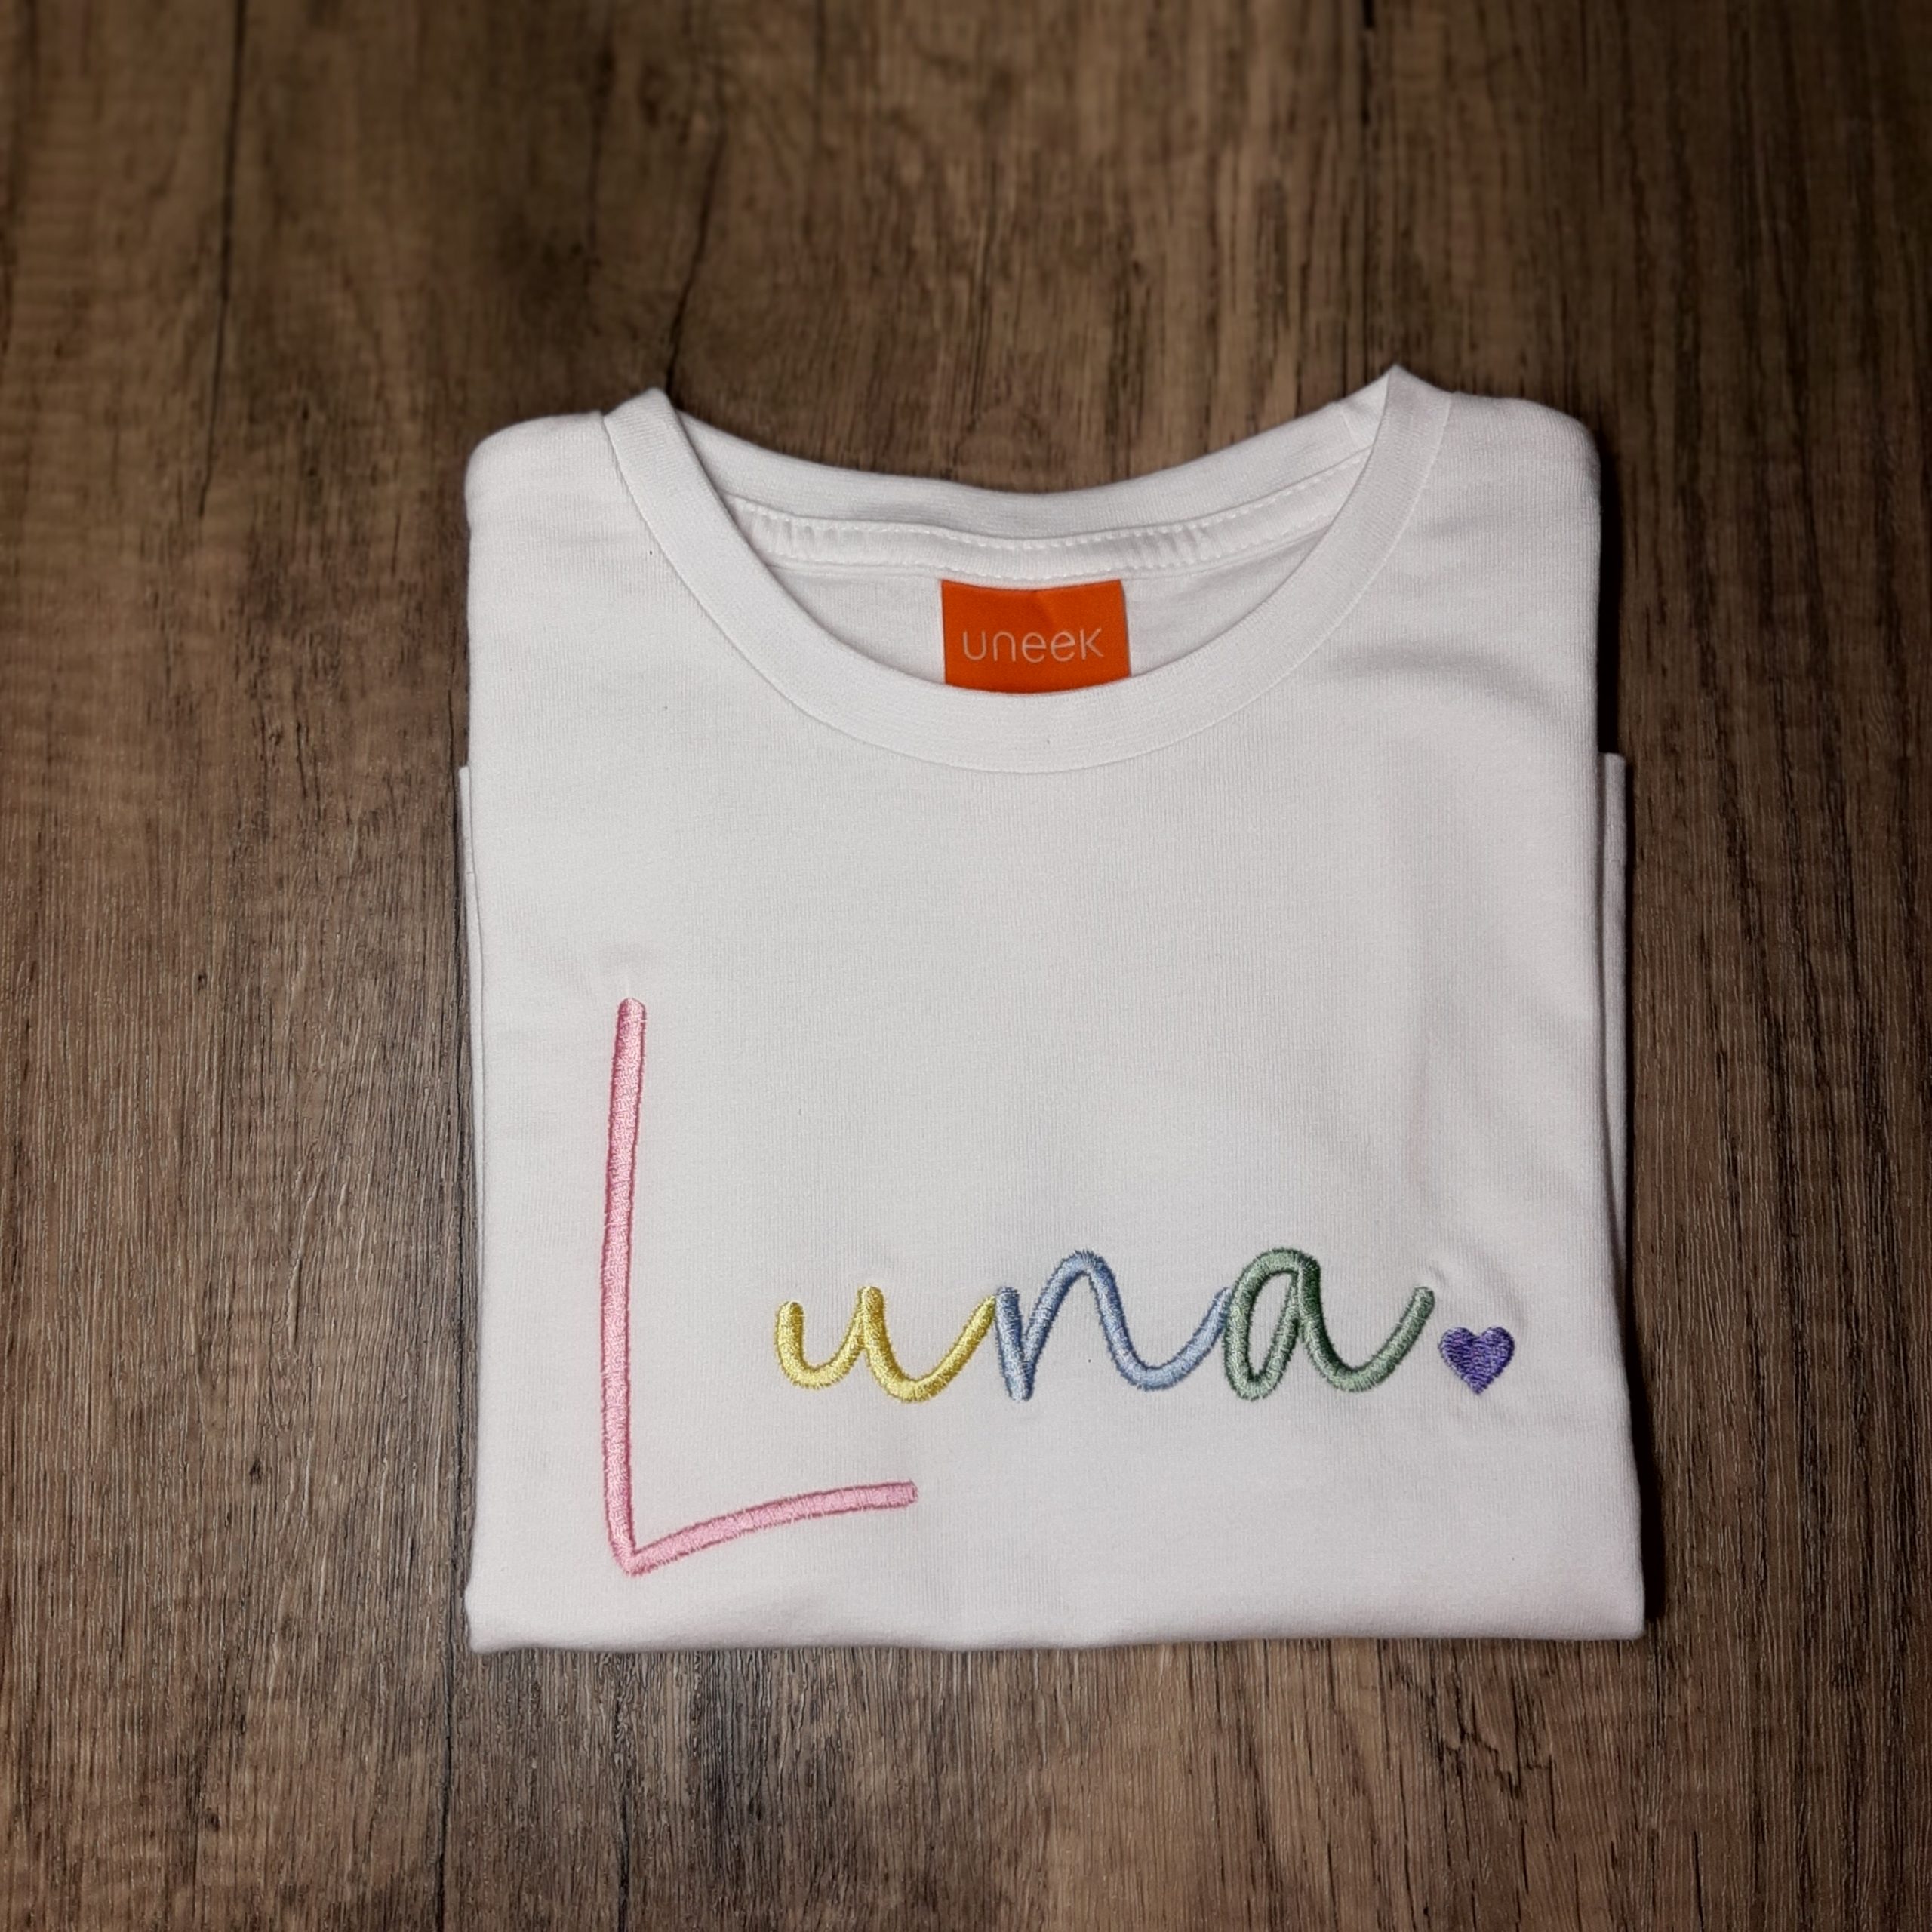 Rainbow Name Children's T Shirt/Jumper in rainbow pastel embroidered name, folded on the floor